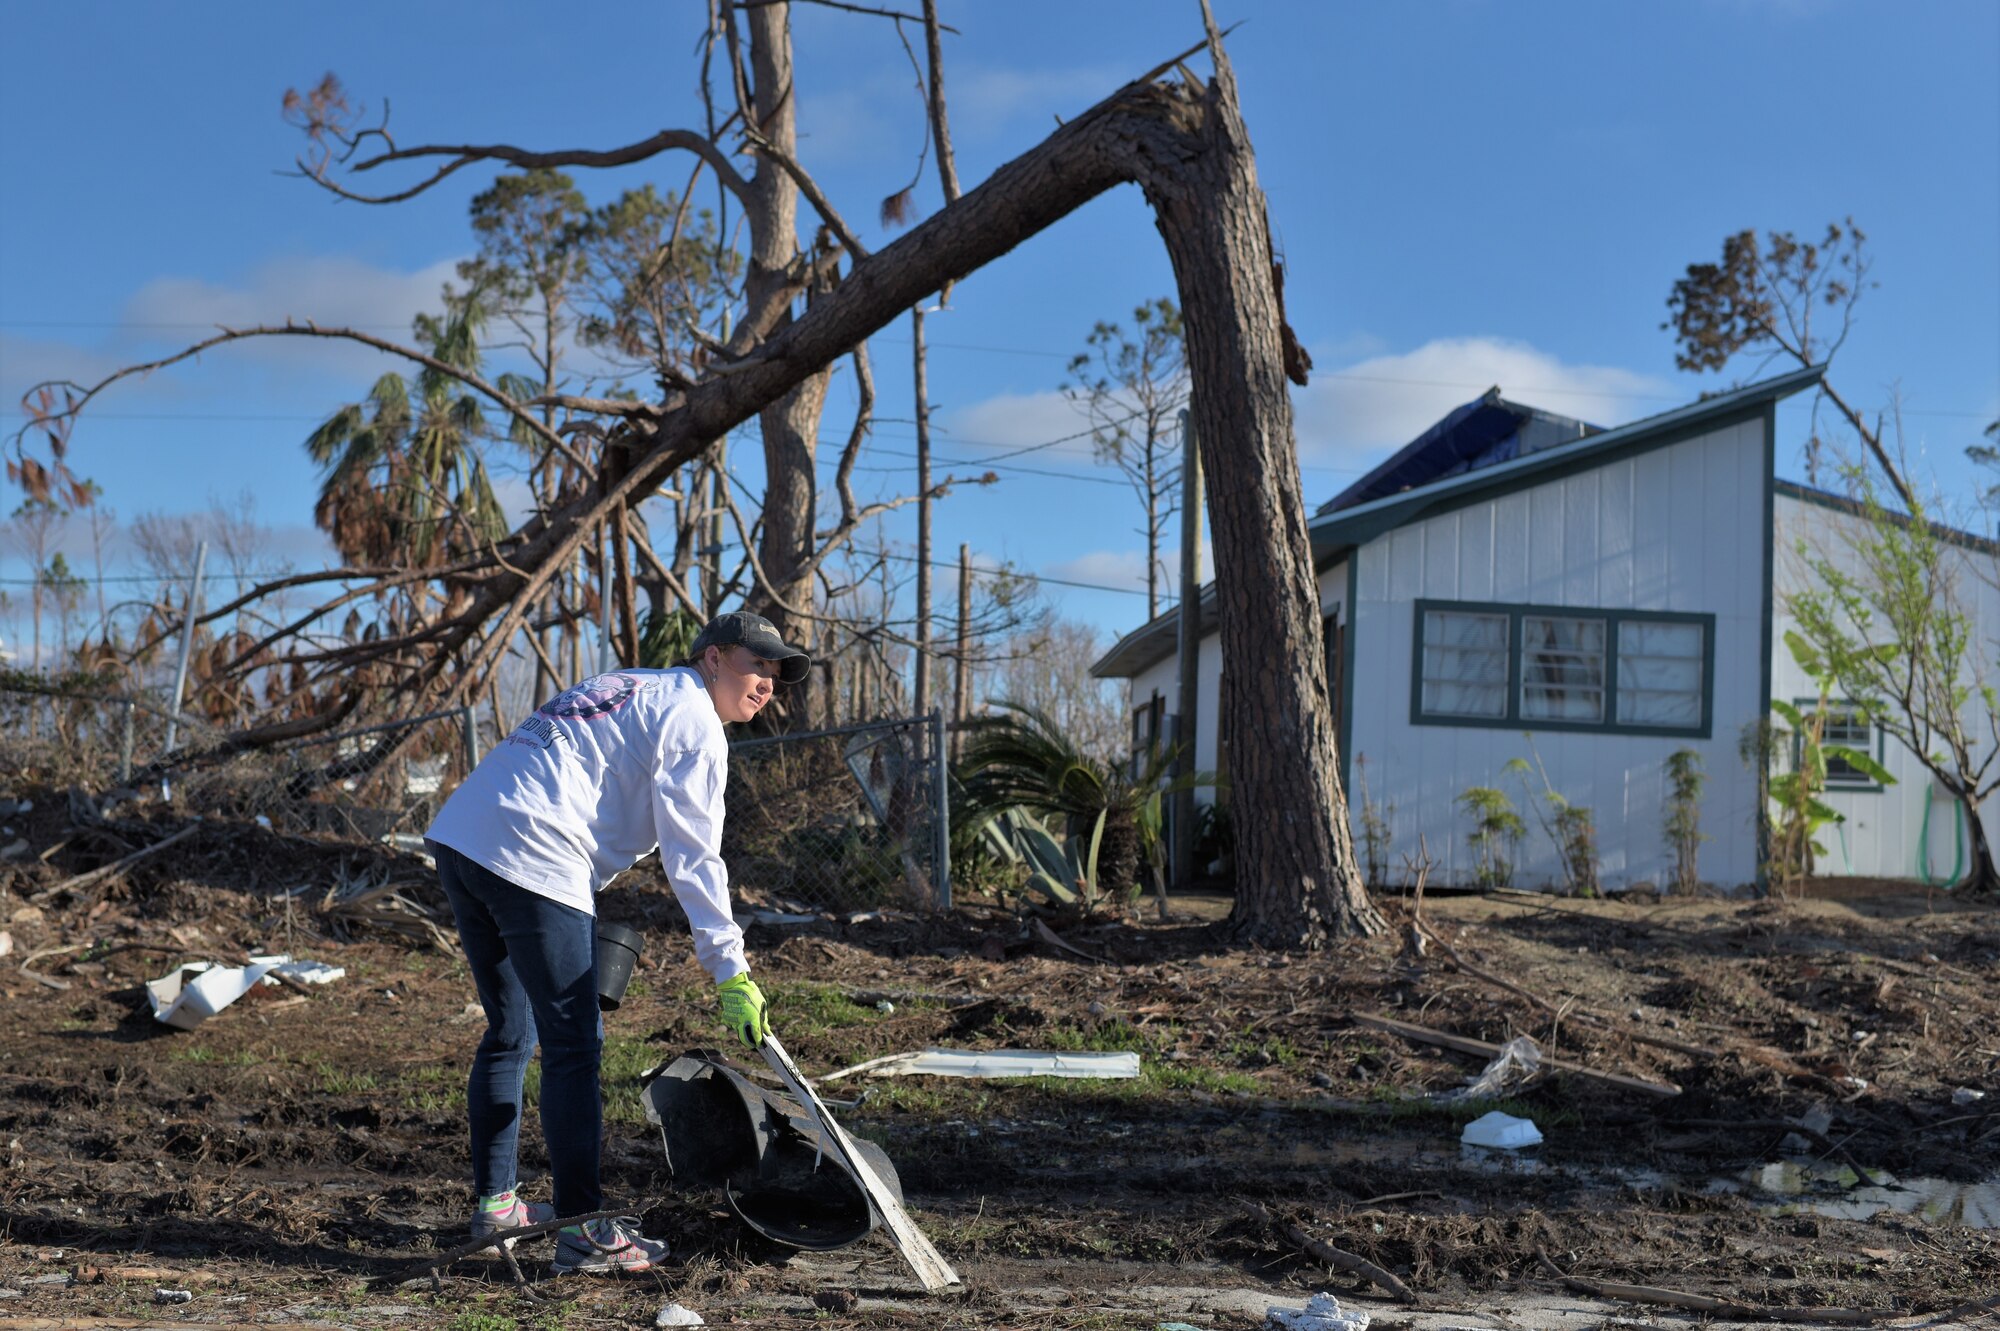 Jennifer Whitesides, a bioenvironmental engineer technician with the 325th Aerospace Medicine Squadron, helps clean Under the Palms Park in Mexico Beach, Fla. Dec. 16, 2018. Thirty nine volunteers from Tyndall and Eglin Air Force Bases came together to help clean Mexico Beach, one of the communities hit the hardest by Hurricane Michael. The volunteers were able to clean up more than 40 cubic yards of debris within four hours. (U.S. Air Force photo by Tech. Sgt. Sara Keller)